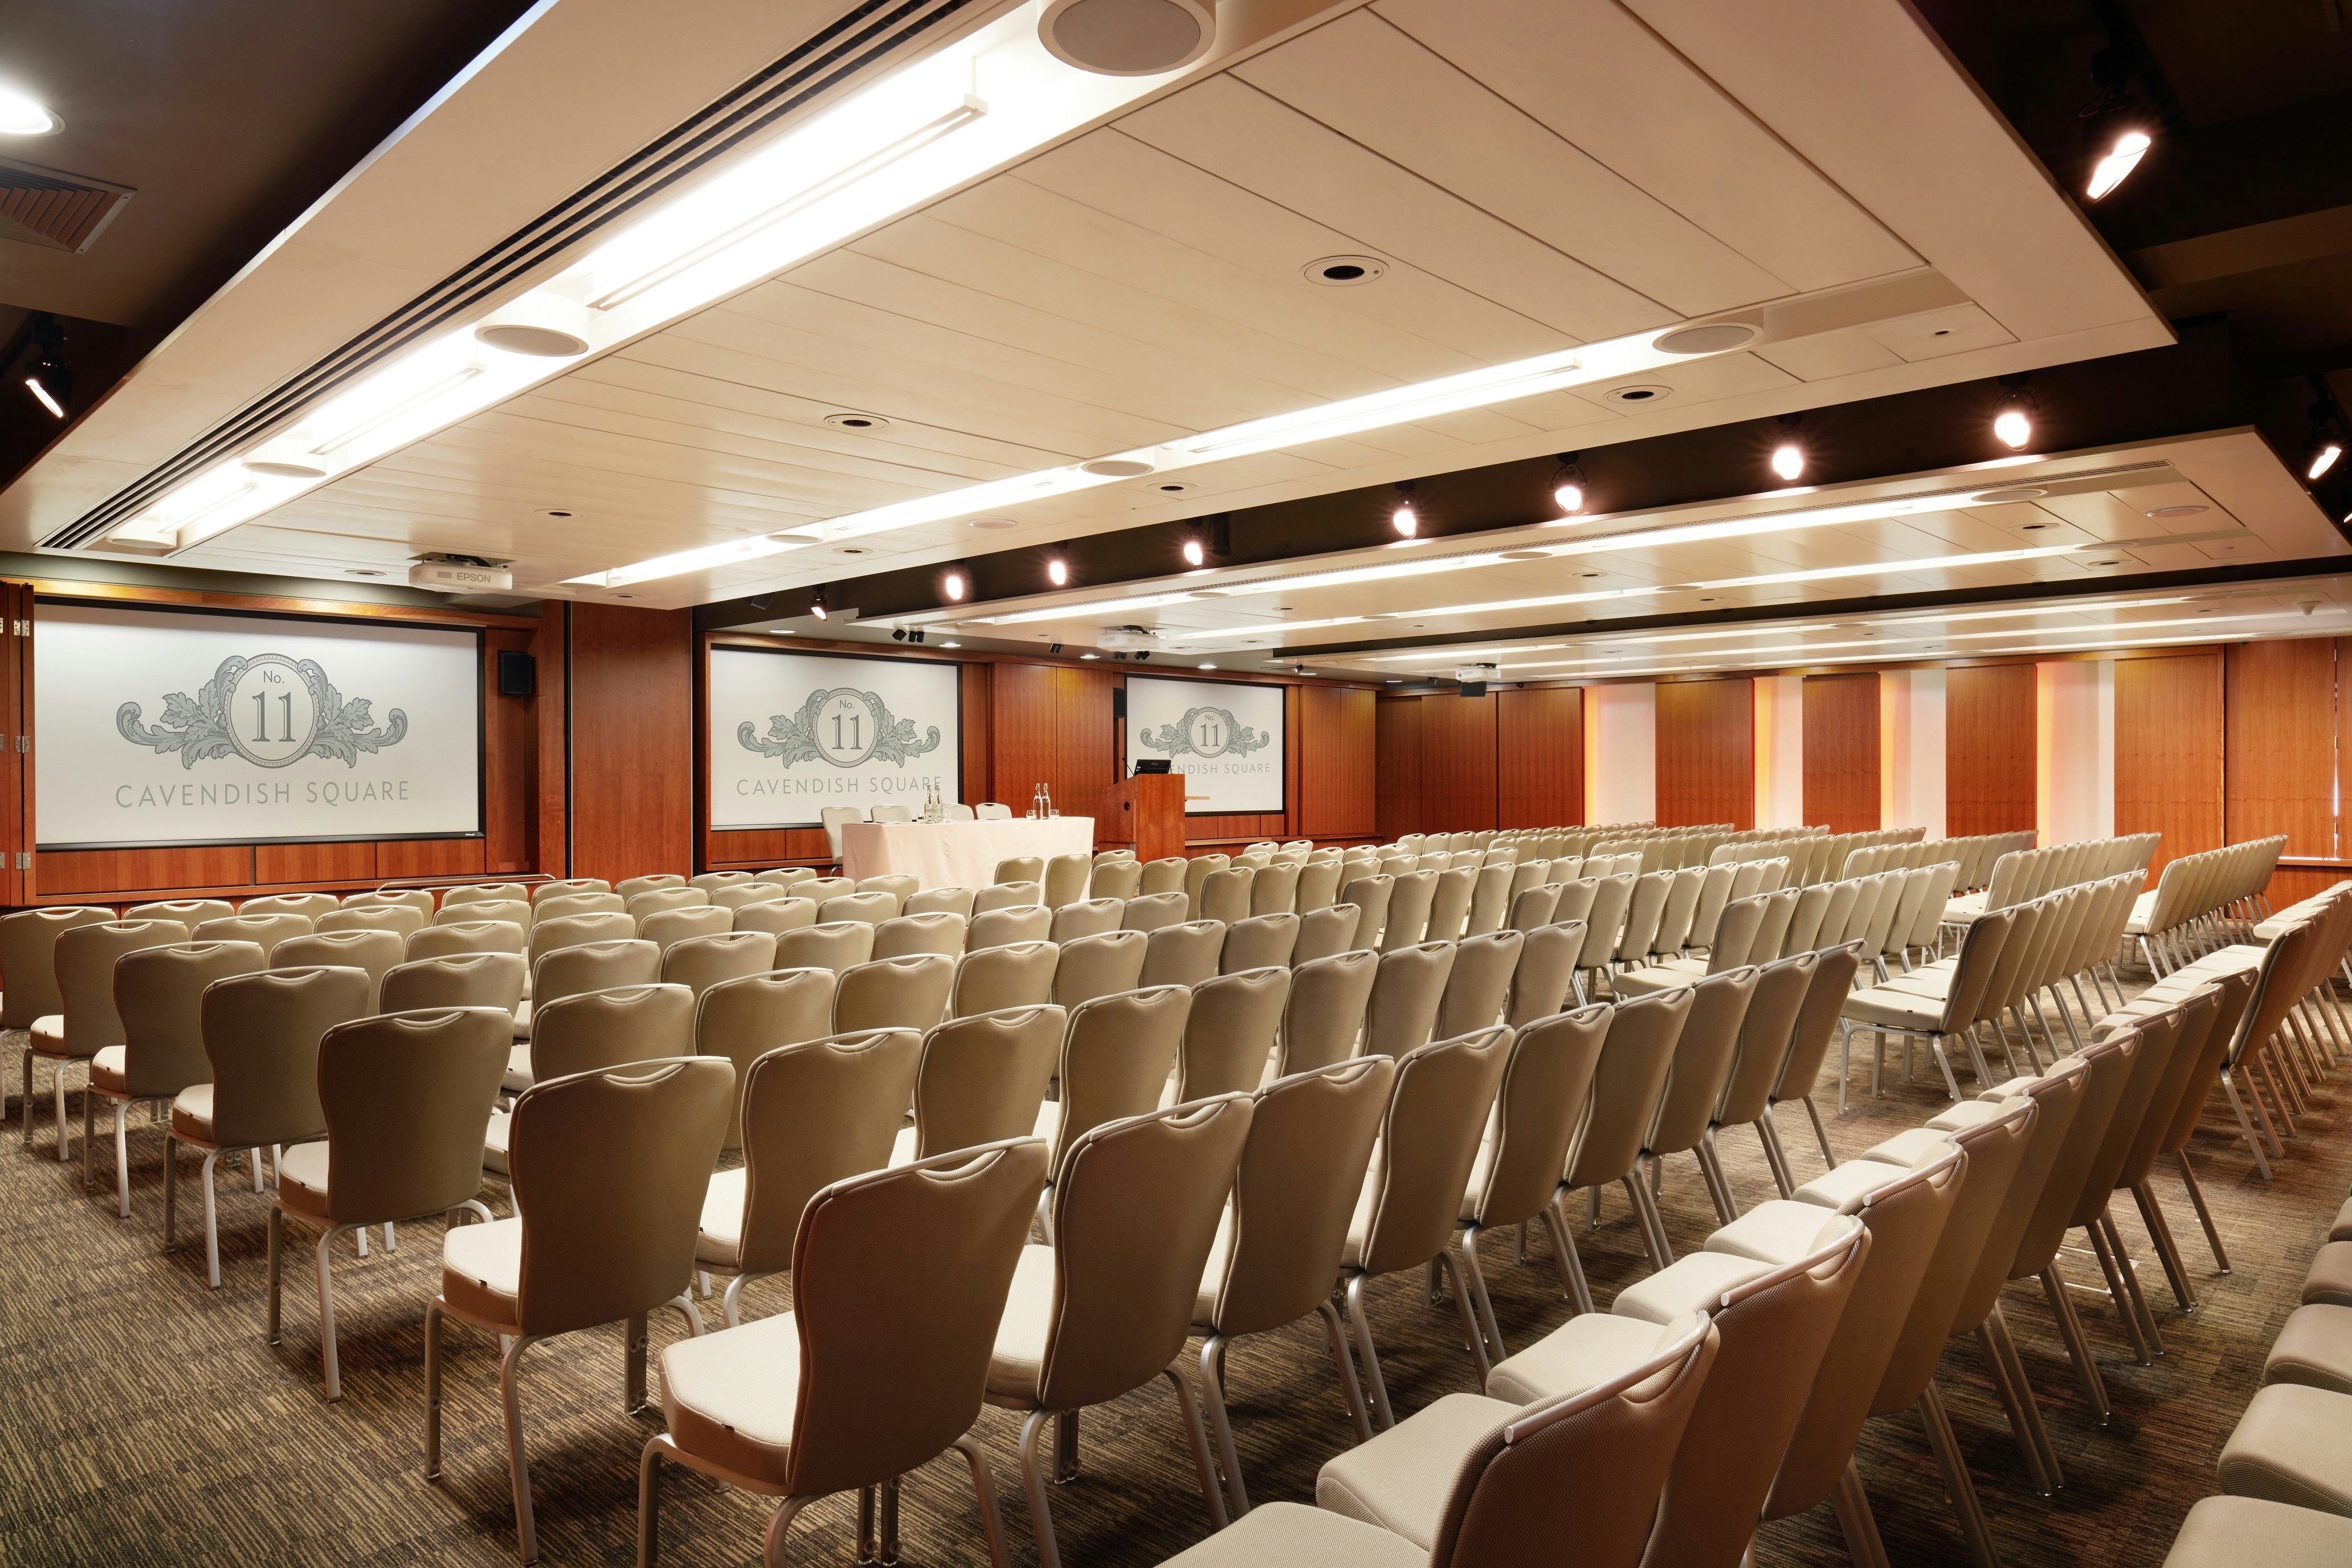 Conference Venues in East London - No.11 Cavendish Square